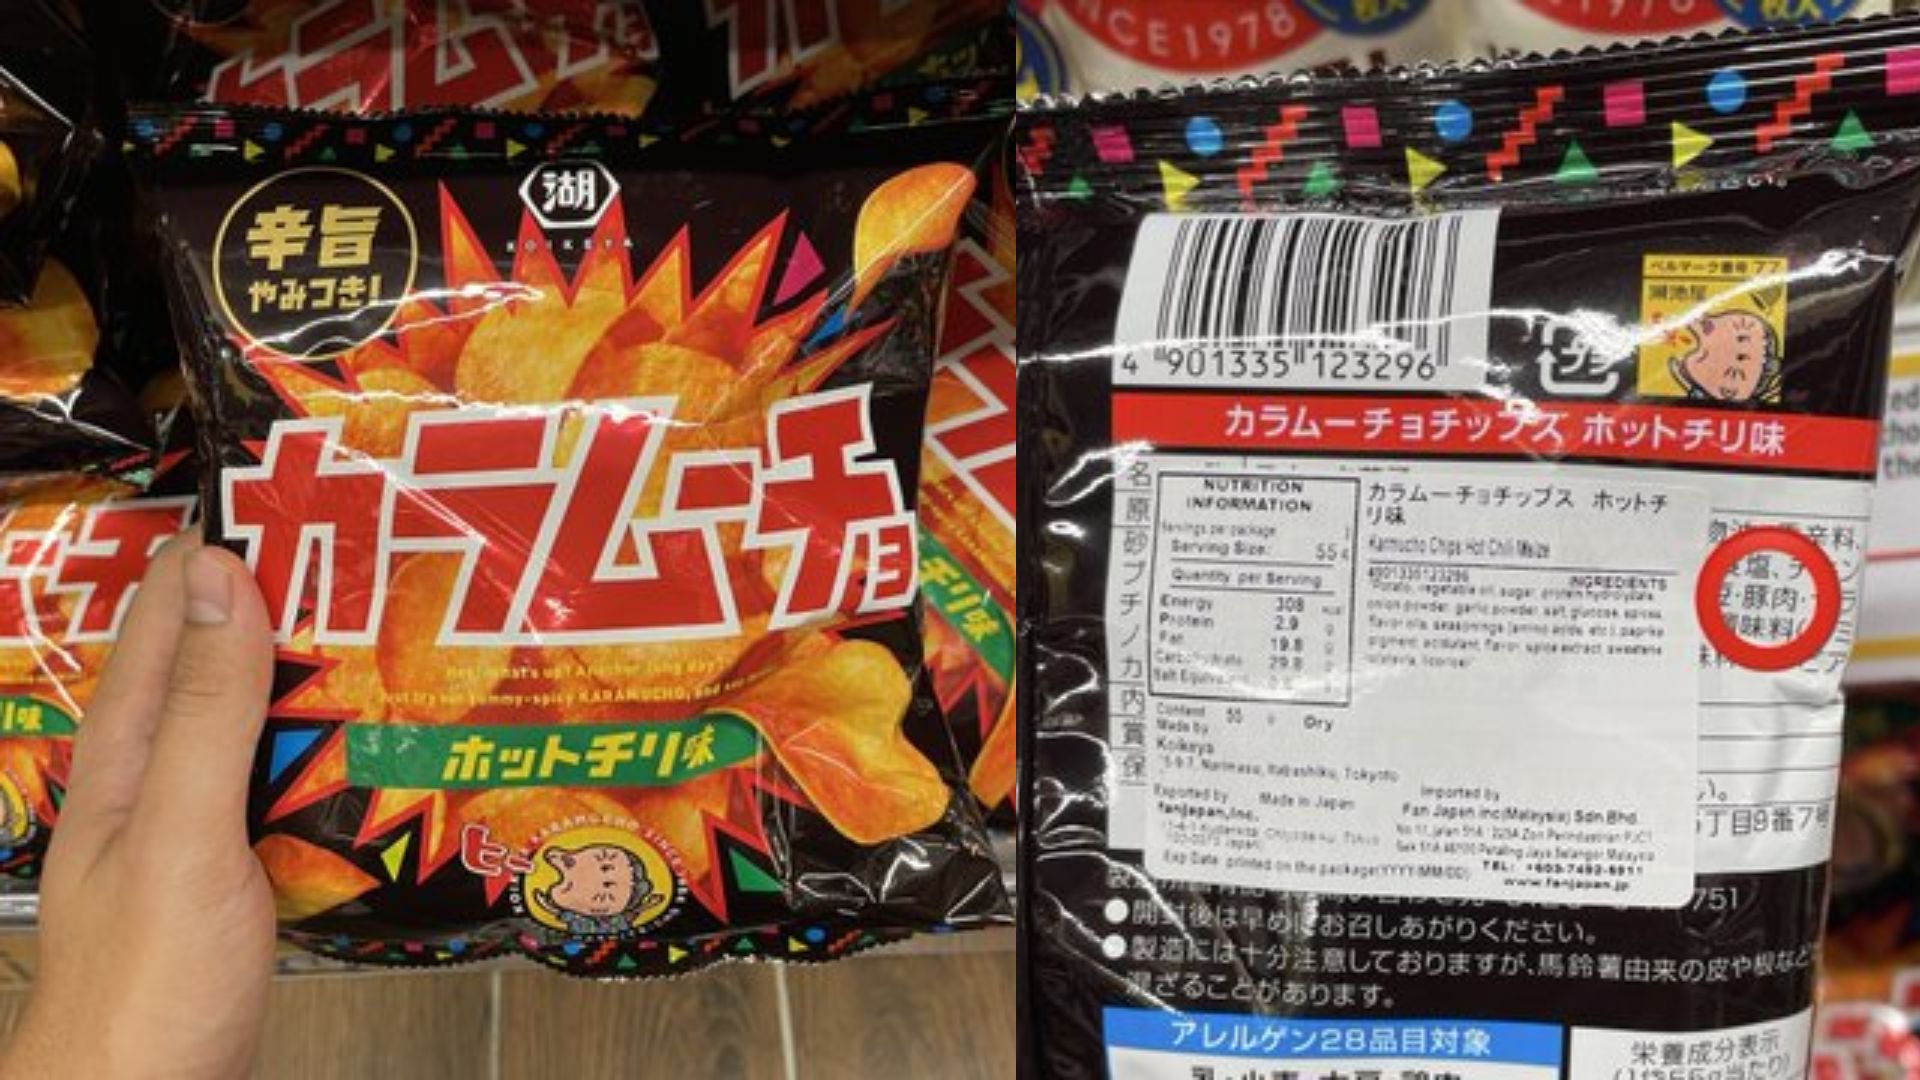 The Japanese potato chips sold at Don Don Donki Bukit Bintang had a few missing ingredients in the english translation.